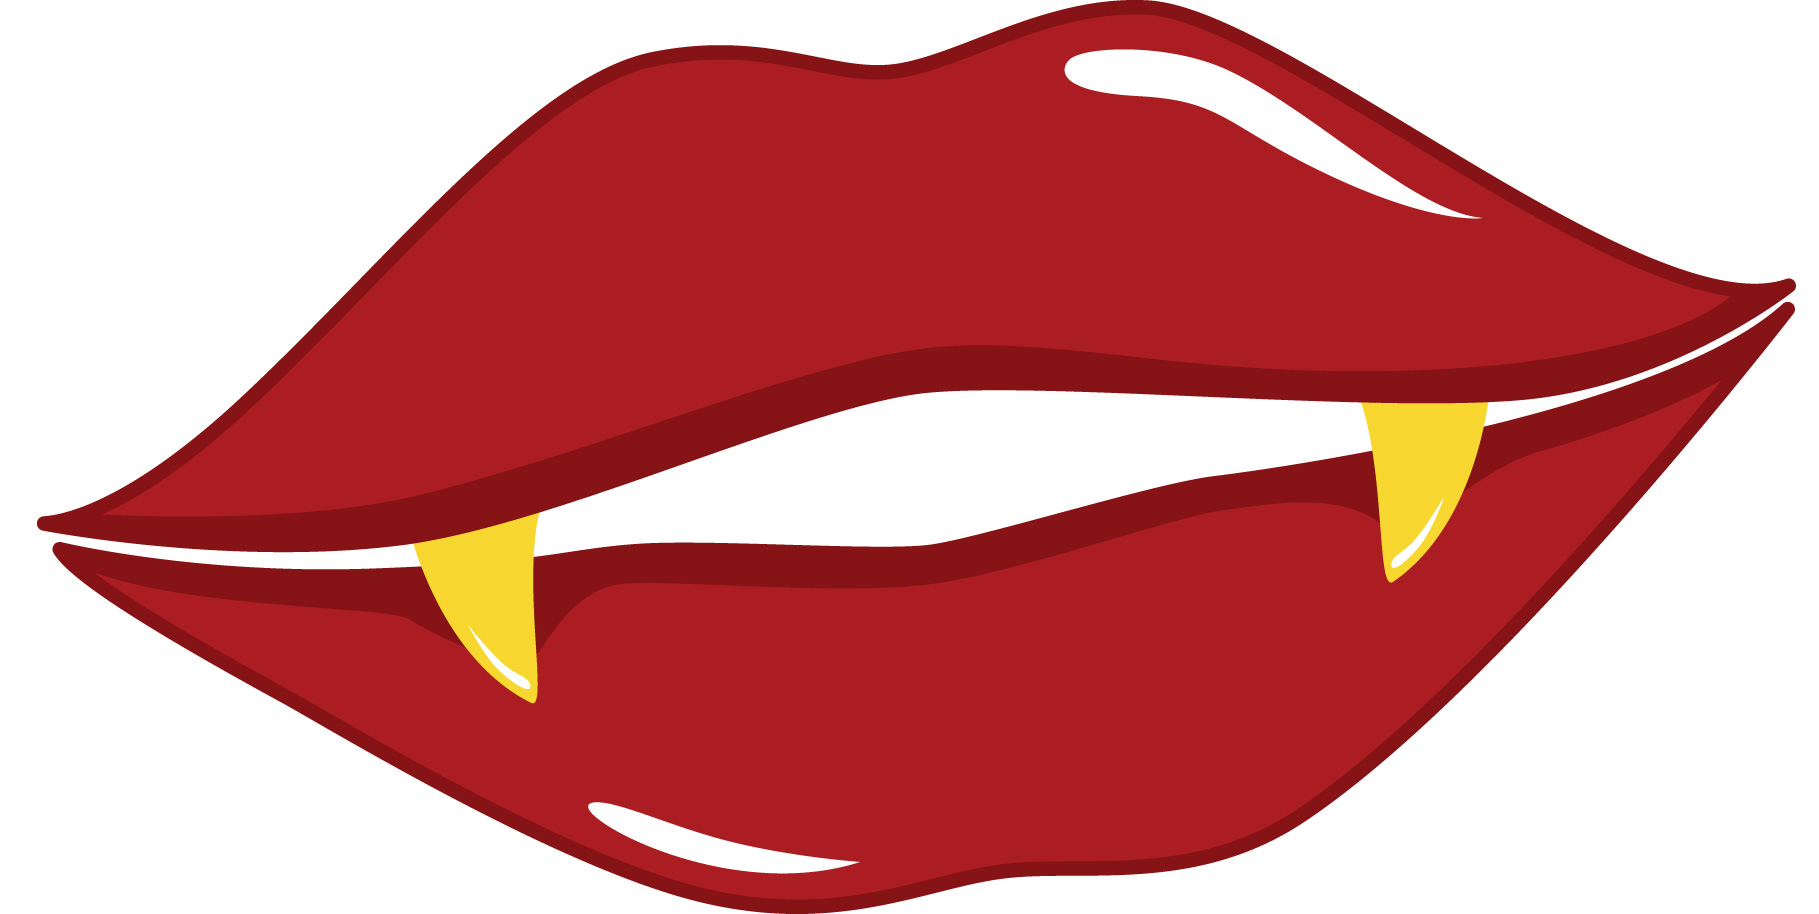 Picture Of Big Red Lips - ClipArt Best